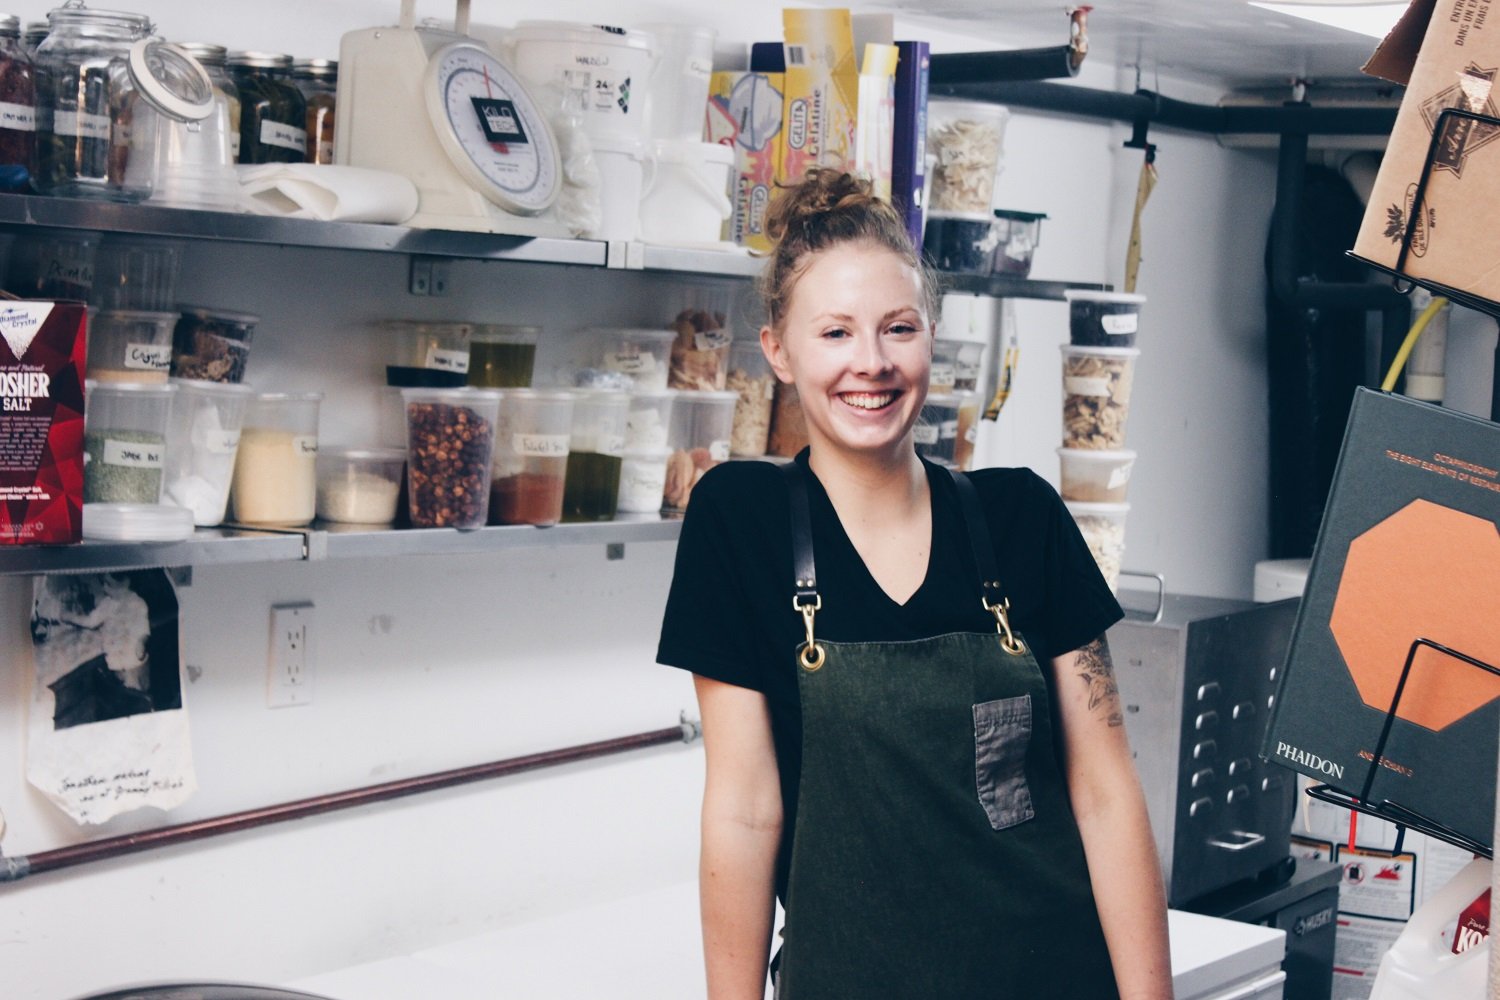 Meet Professional Pastry Chef and Ottawa Alumni, Stef Scrivens 